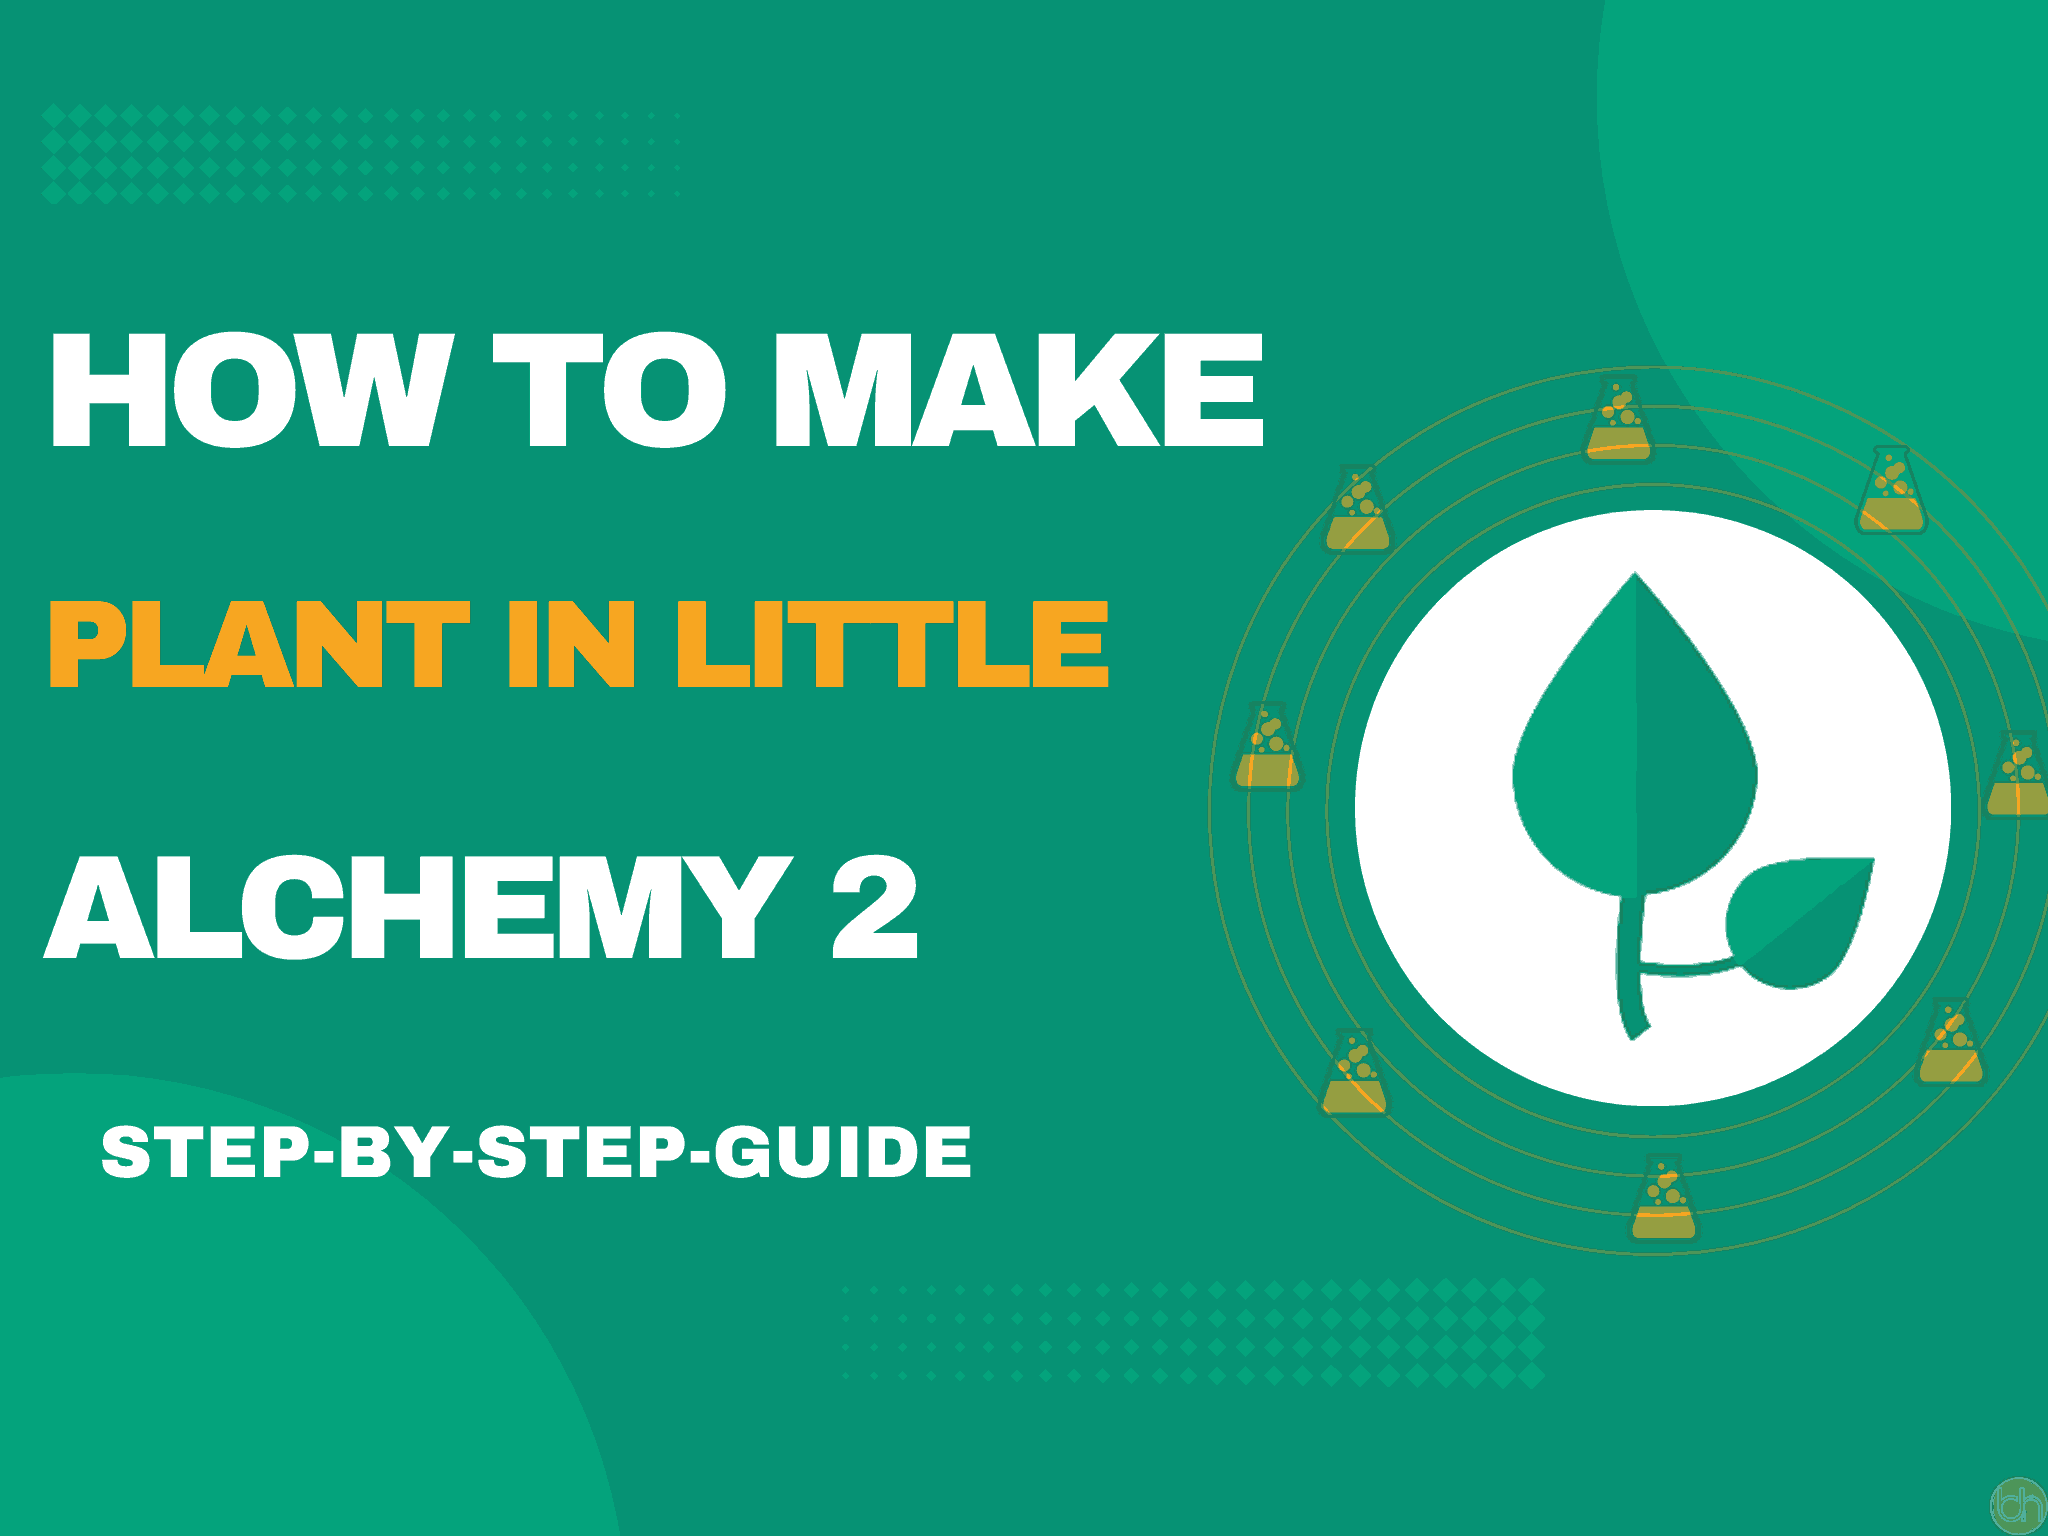 How To Make a Plant In Little Alchemy 2